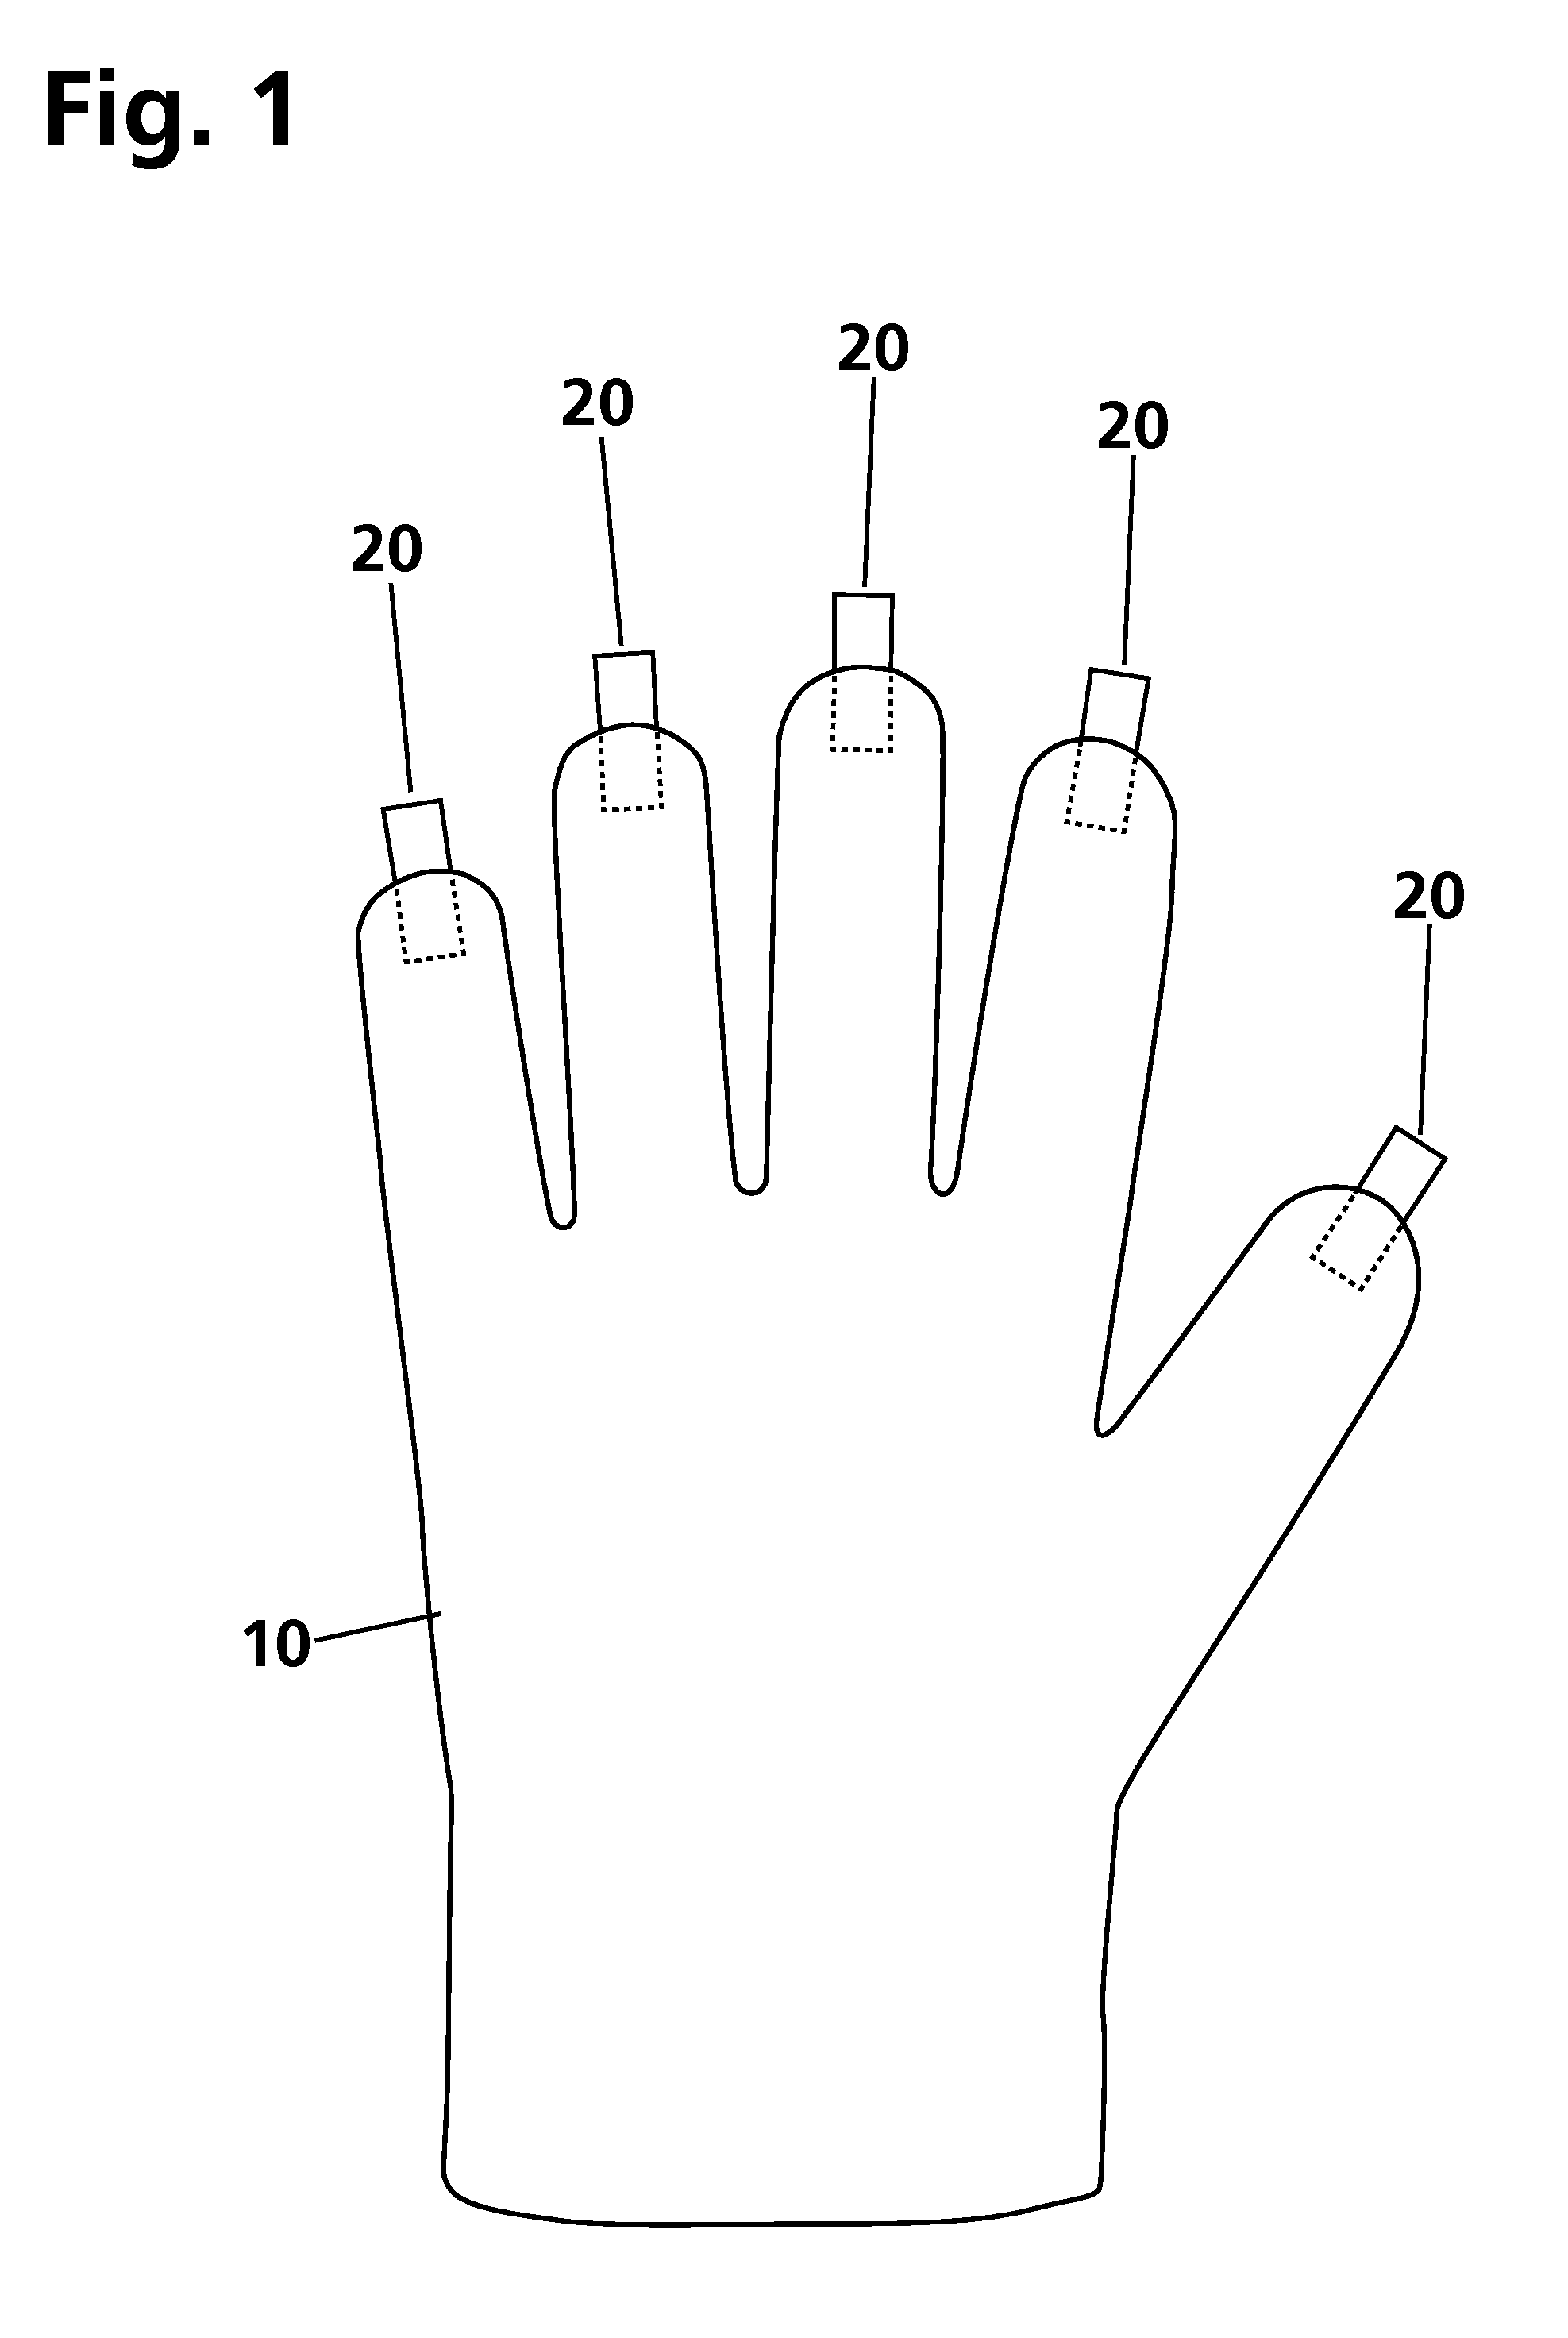 Device, System And Method For Multi-Layered Weatherproof Touchscreen Glove